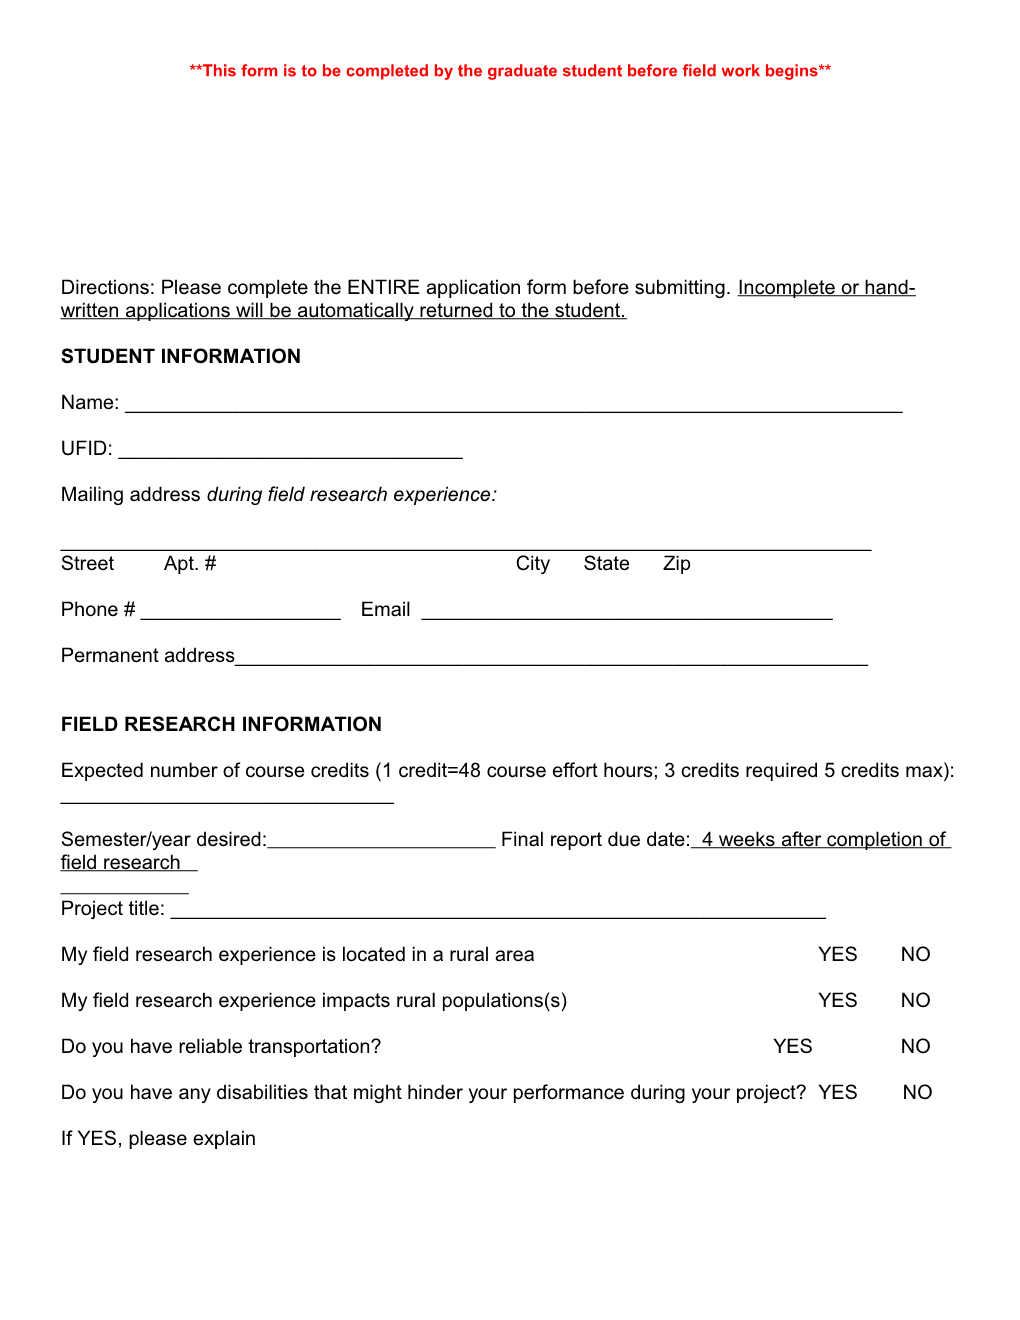 This Form Is to Be Completed by the Graduate Student Before Field Work Begins